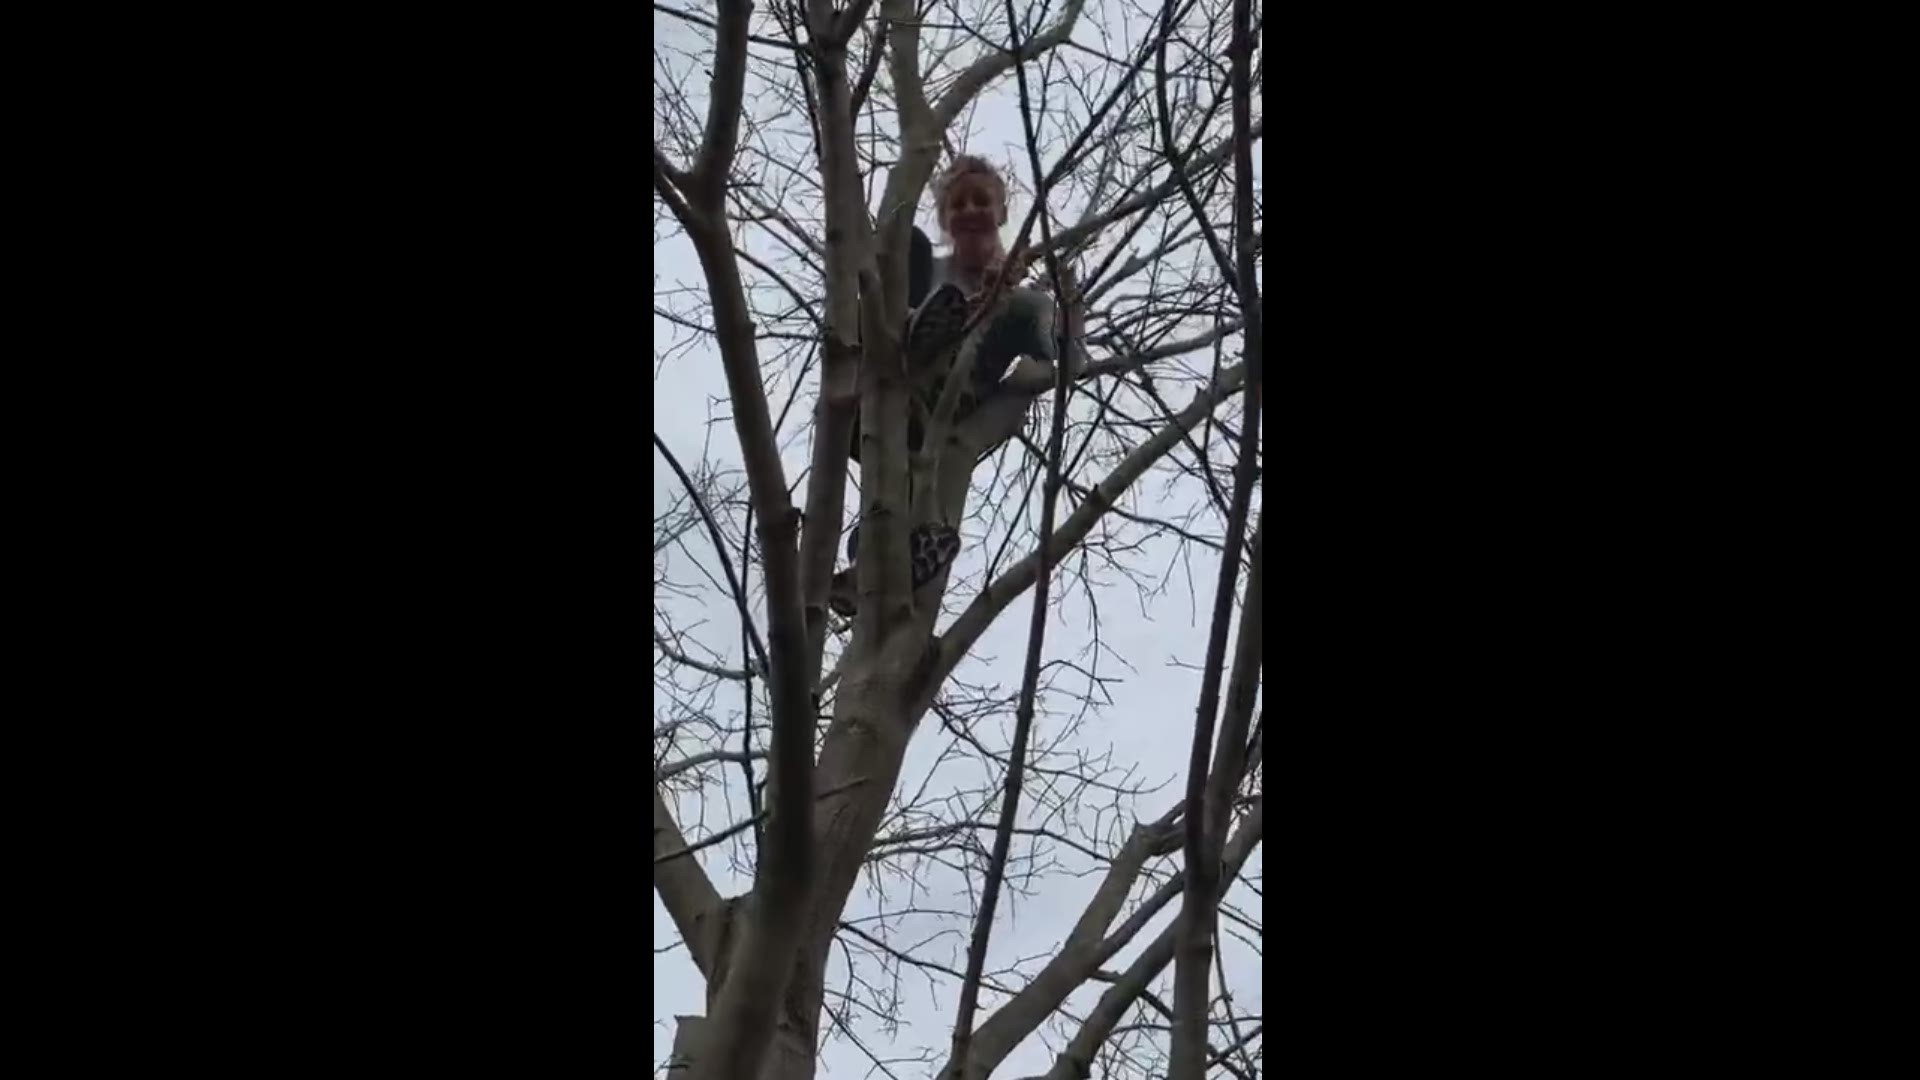 Principal, Miska Rynsburger had to climb a tree, and address all the students, on video, when she reached the top.